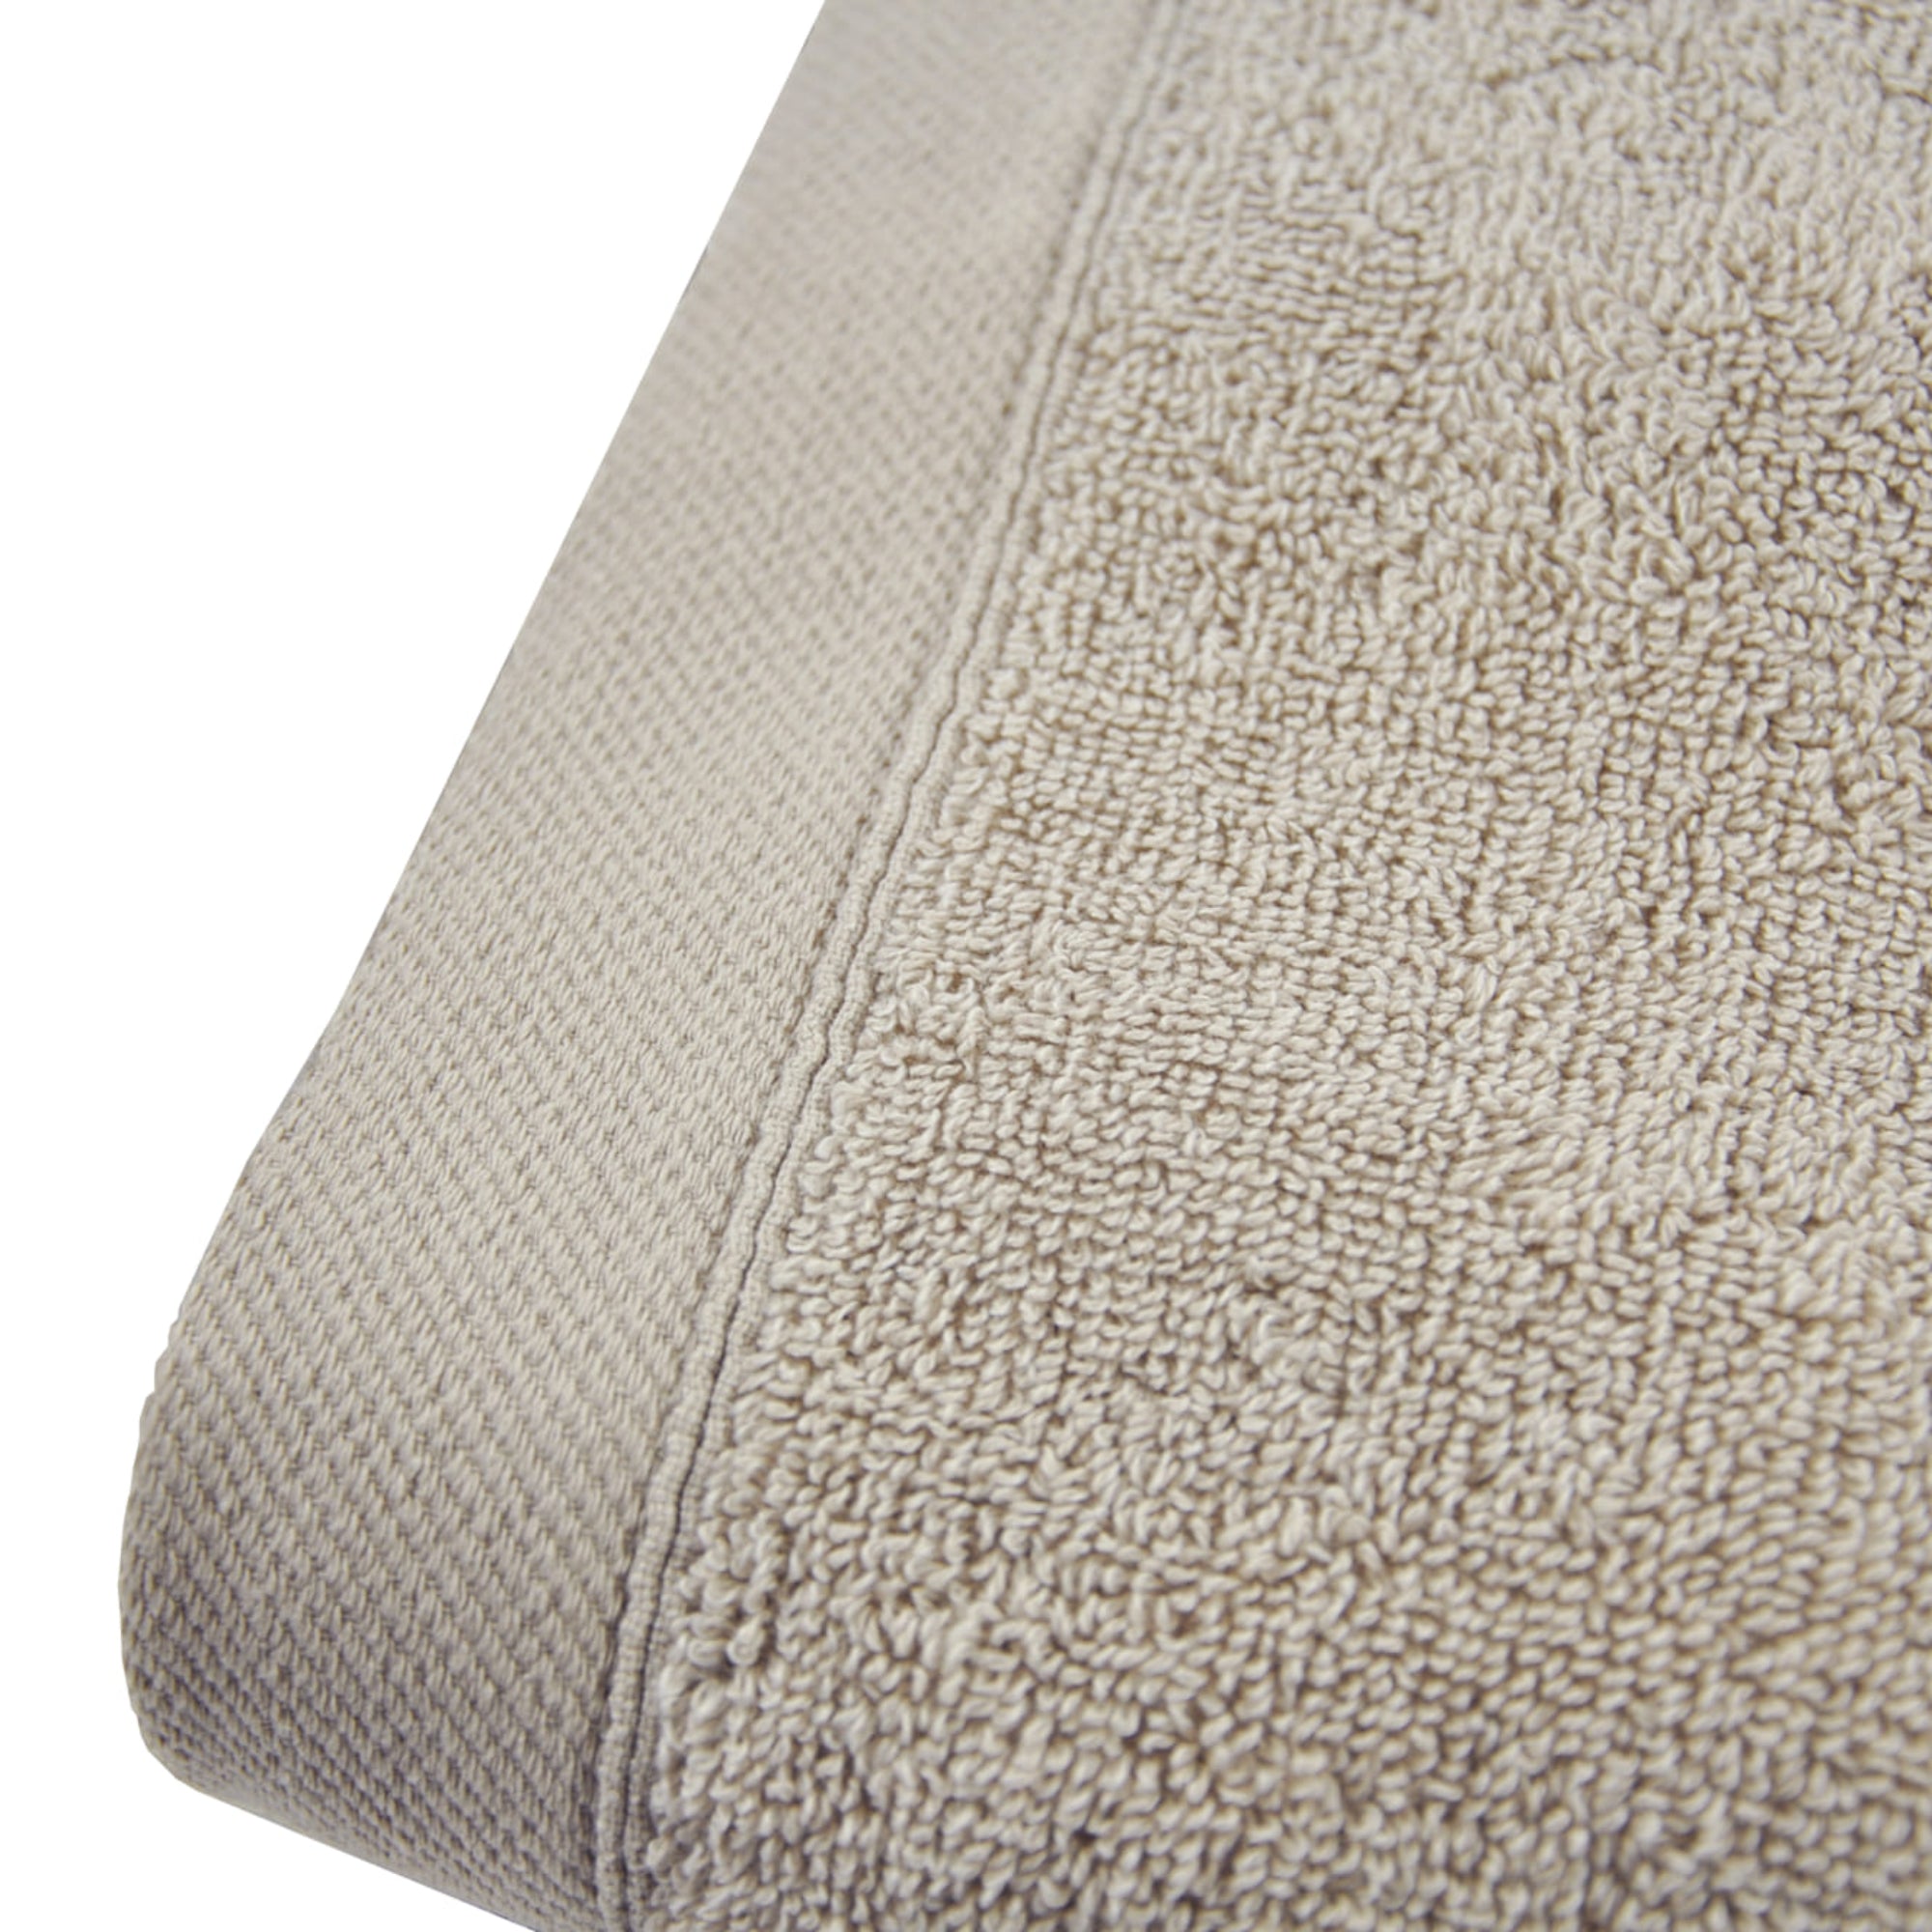 Face Cloth (3 pack) Abode Eco by Drift Home in Natural